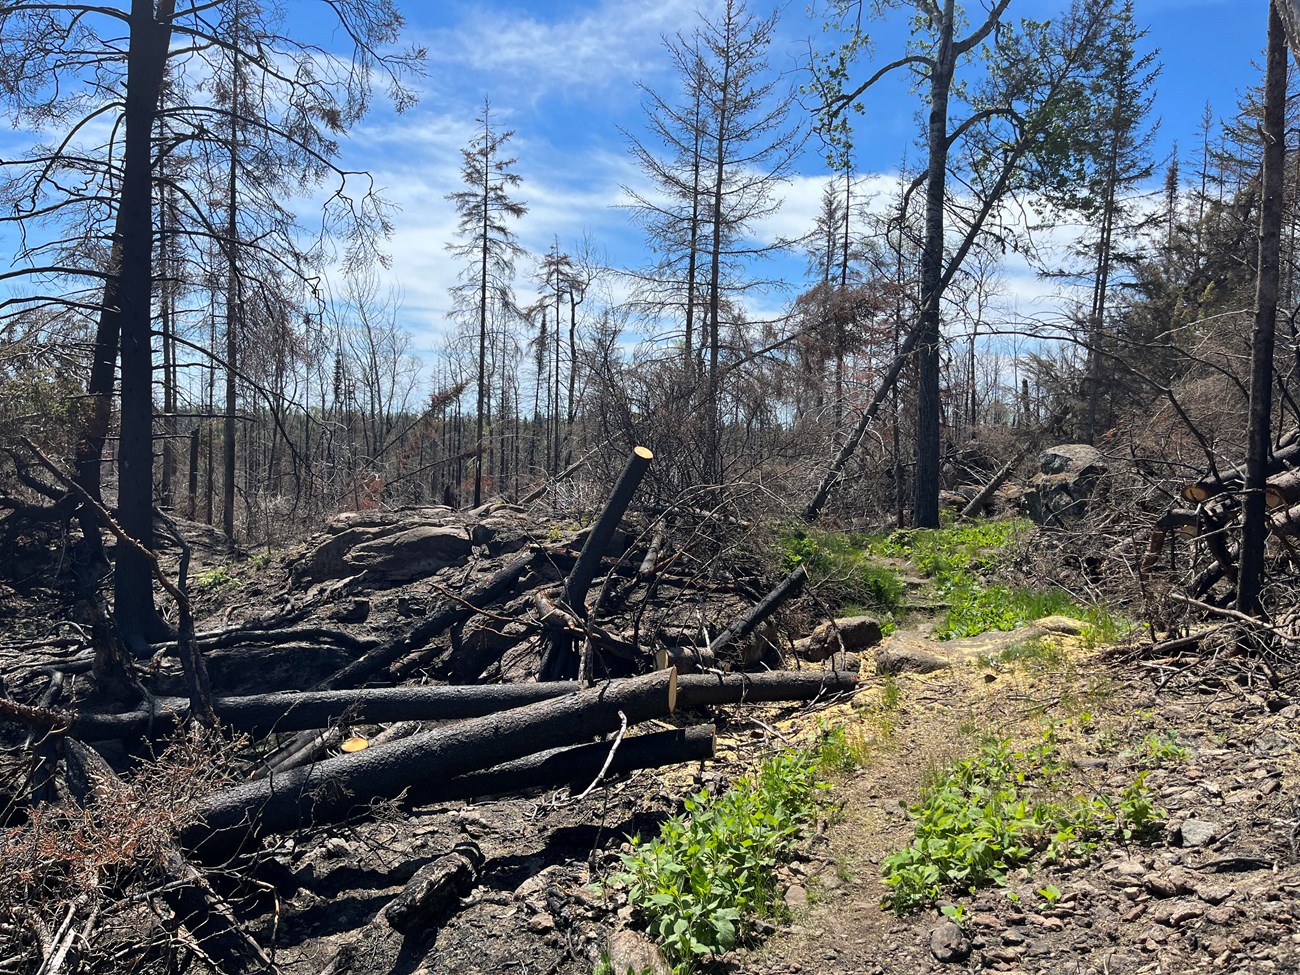 A landscape of the burn area of the 2021 Horne Fire. Both sides of the trail are blackened and charred, and new, bright green growth is growing at the trailside.